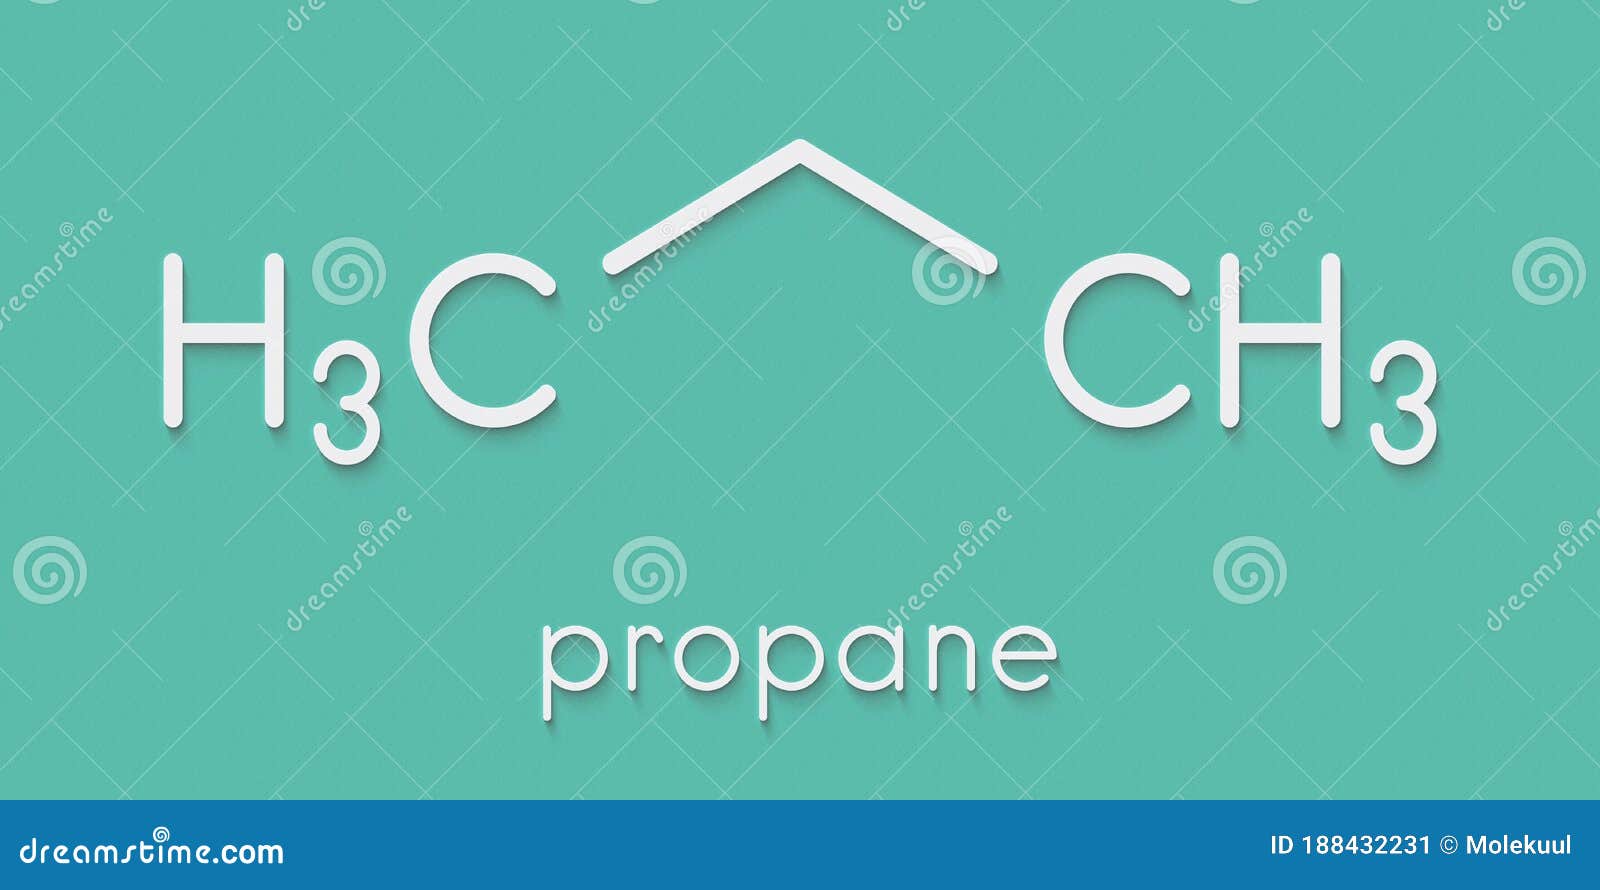 propane hydrocarbon molecule. alkane used as fuel in portable stoves, gas blowtorches, cars, etc. skeletal formula.